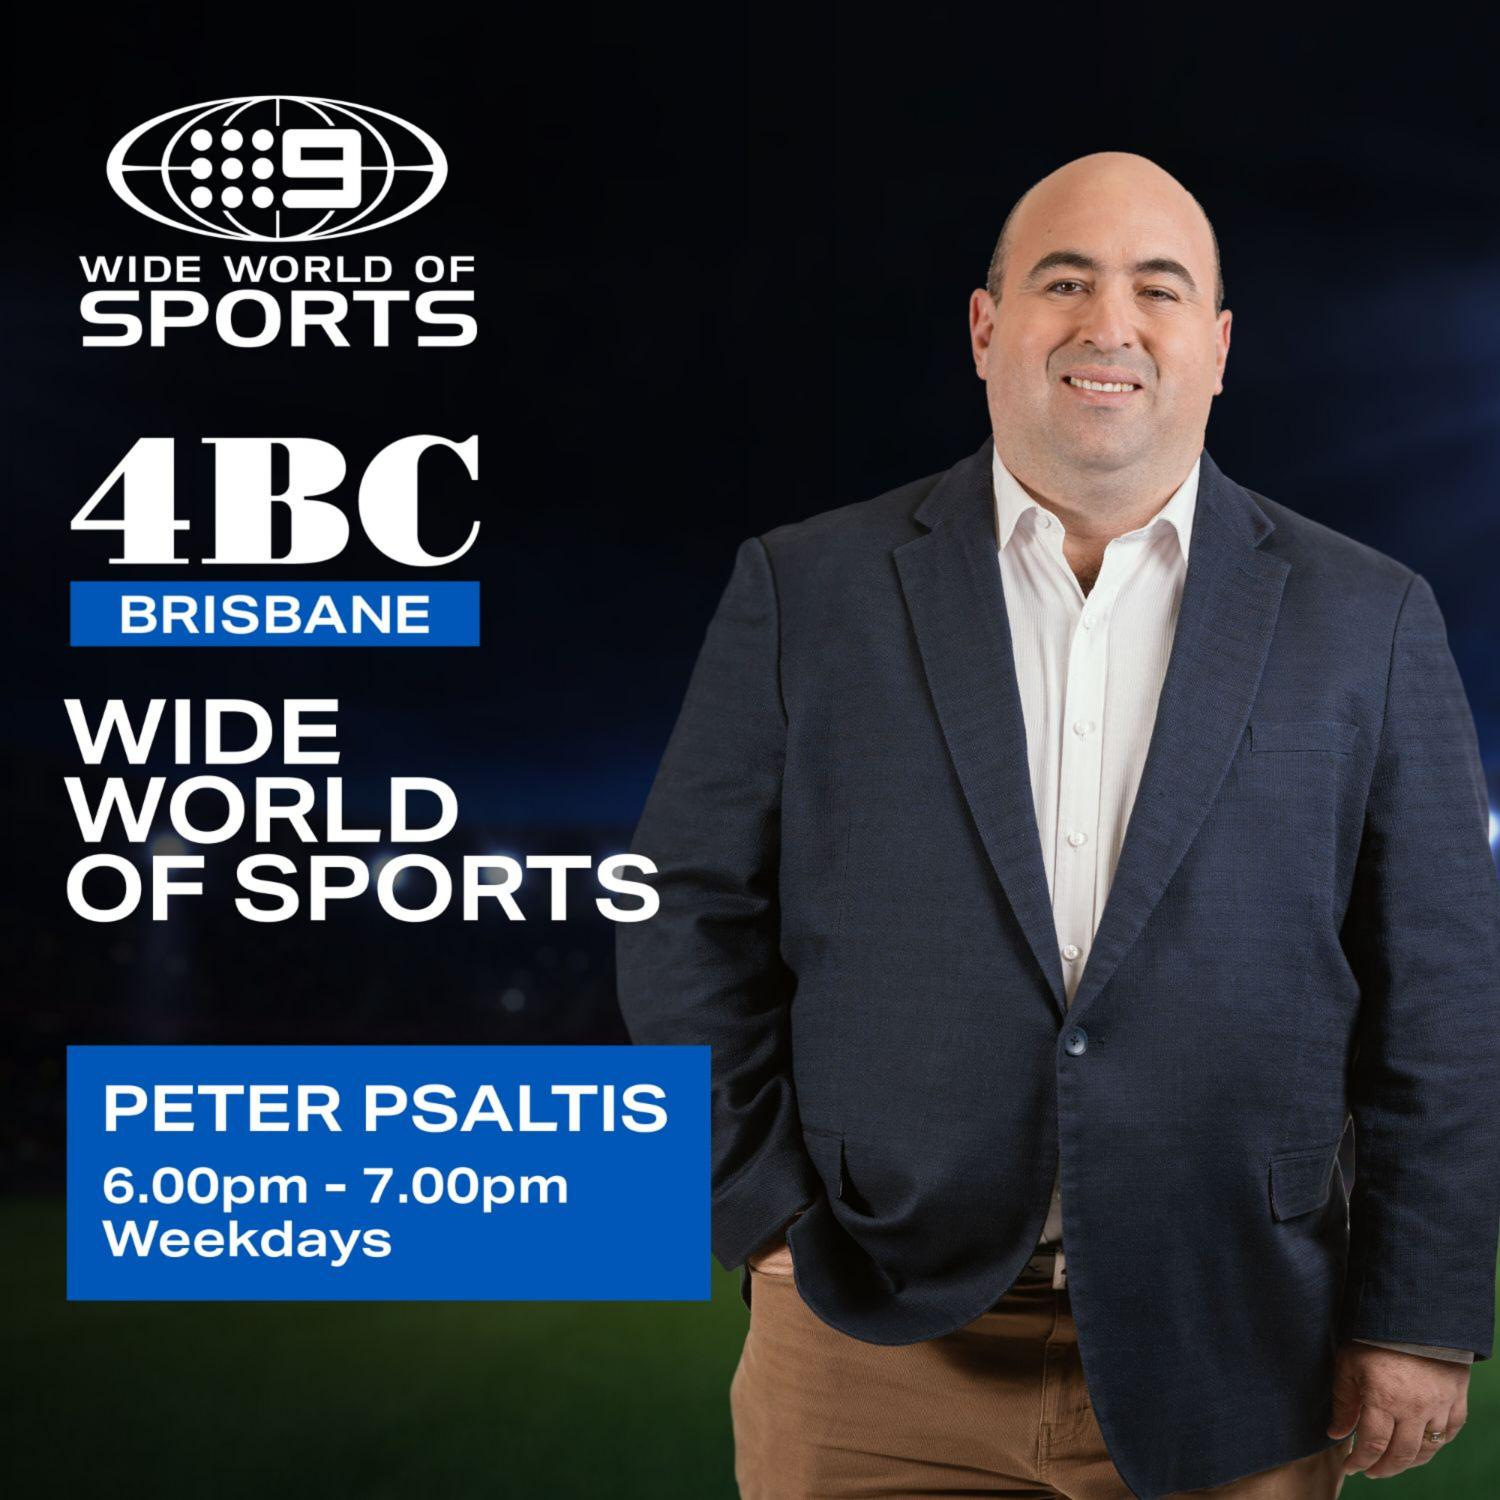 'The world's its oyster': Former ARLC chairman weighs in on the NRL